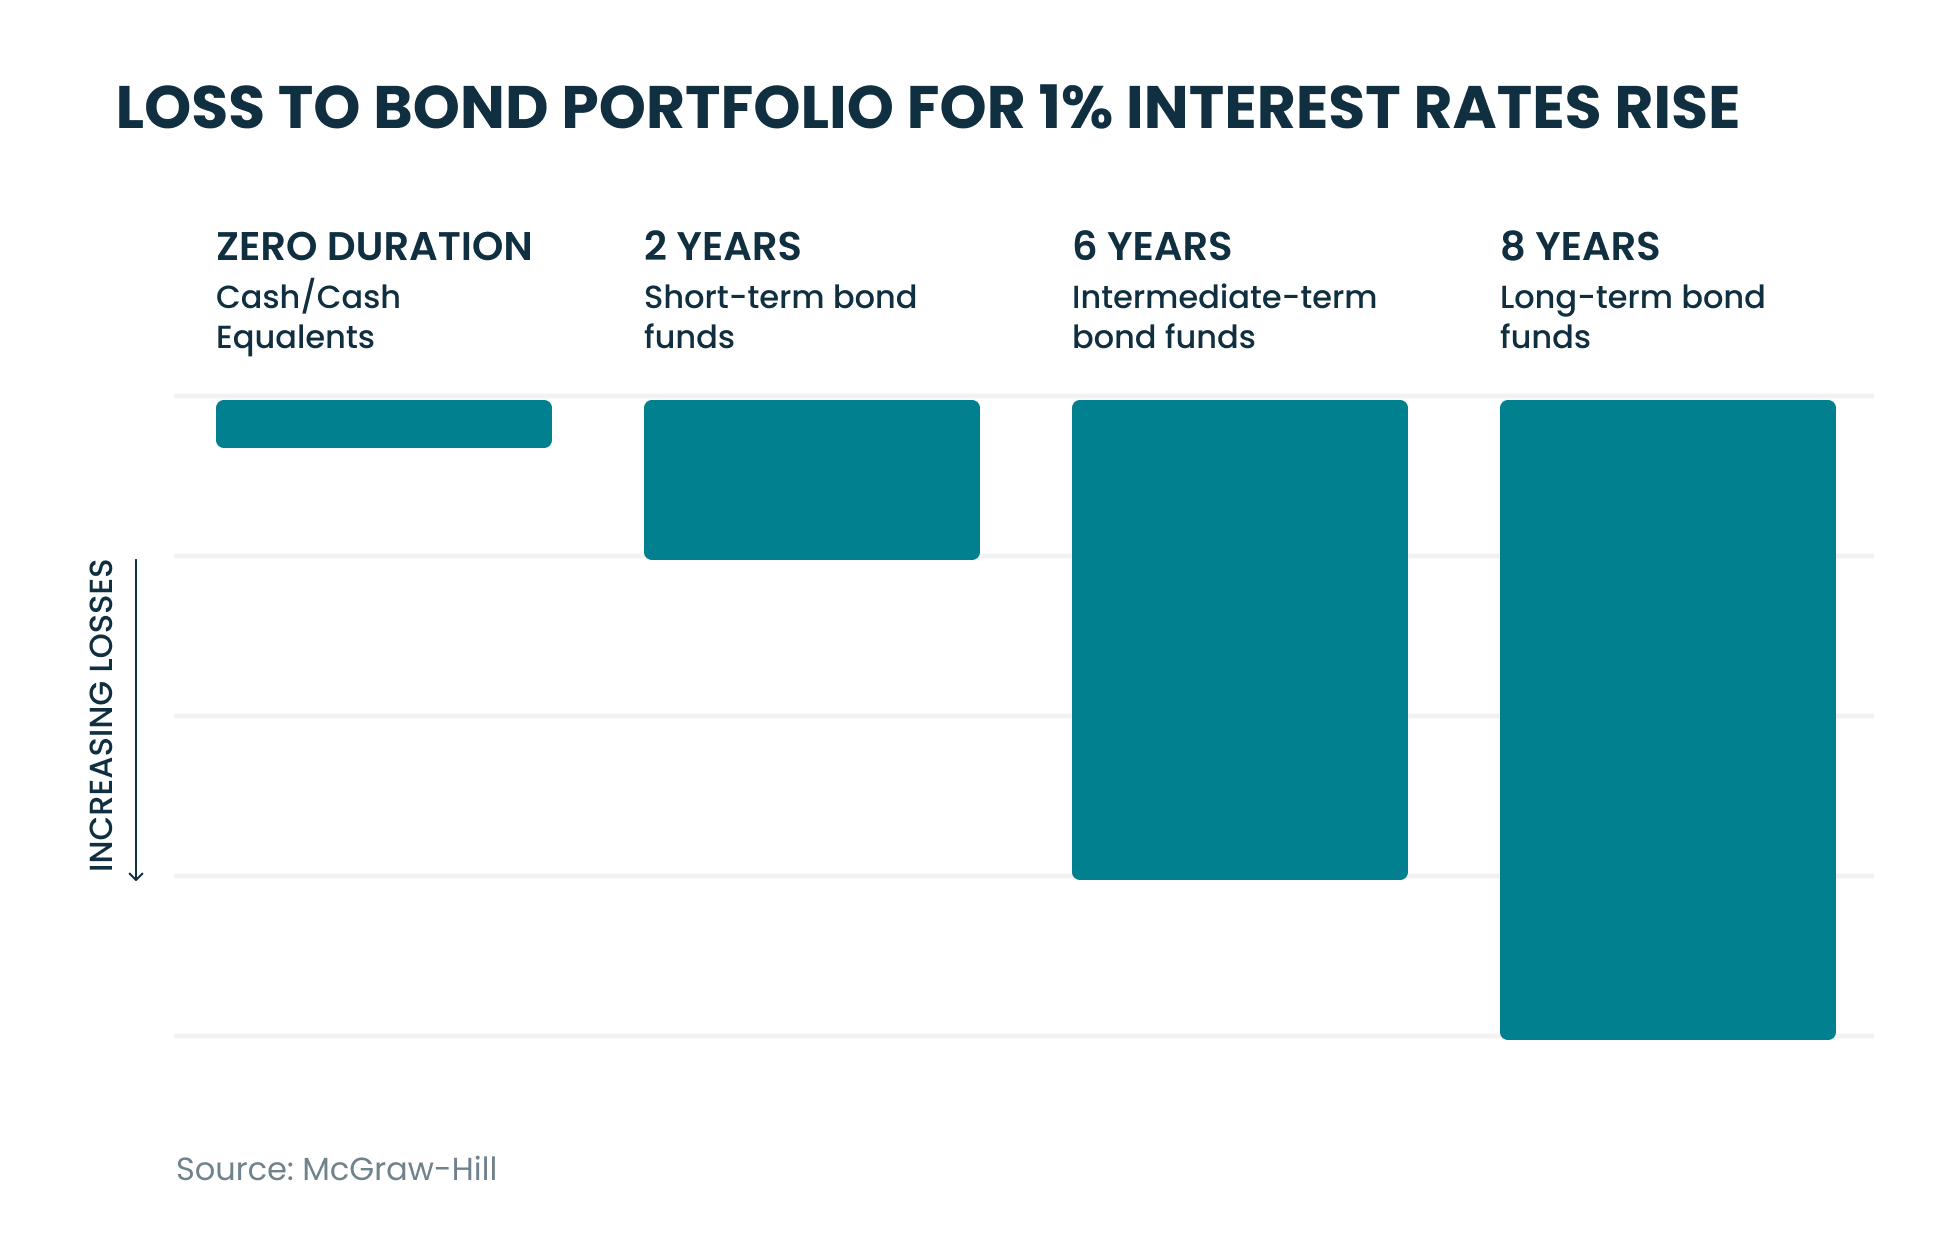 Bond prices typically decrease when interest rates rise